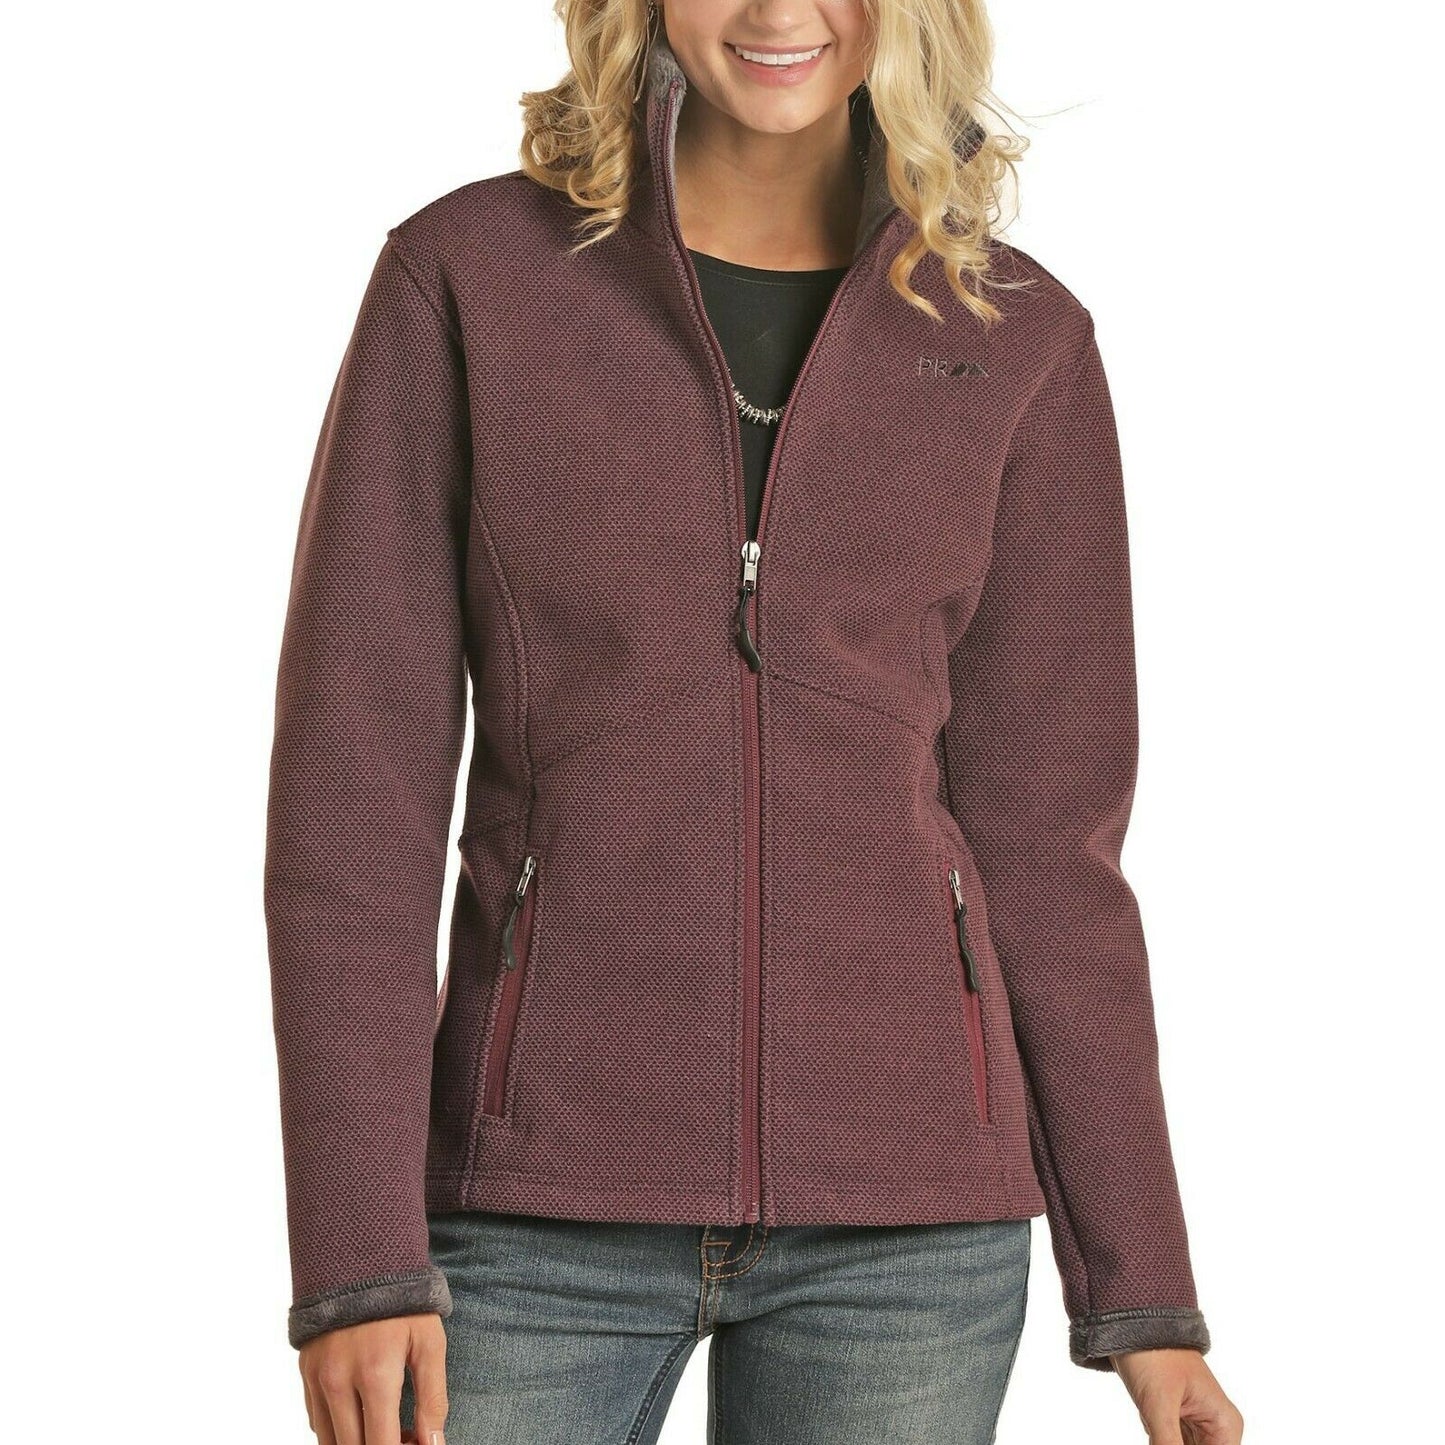 Powder River Outfitters Ladies Maroon Waffle Knit Jacket 52-6660-60